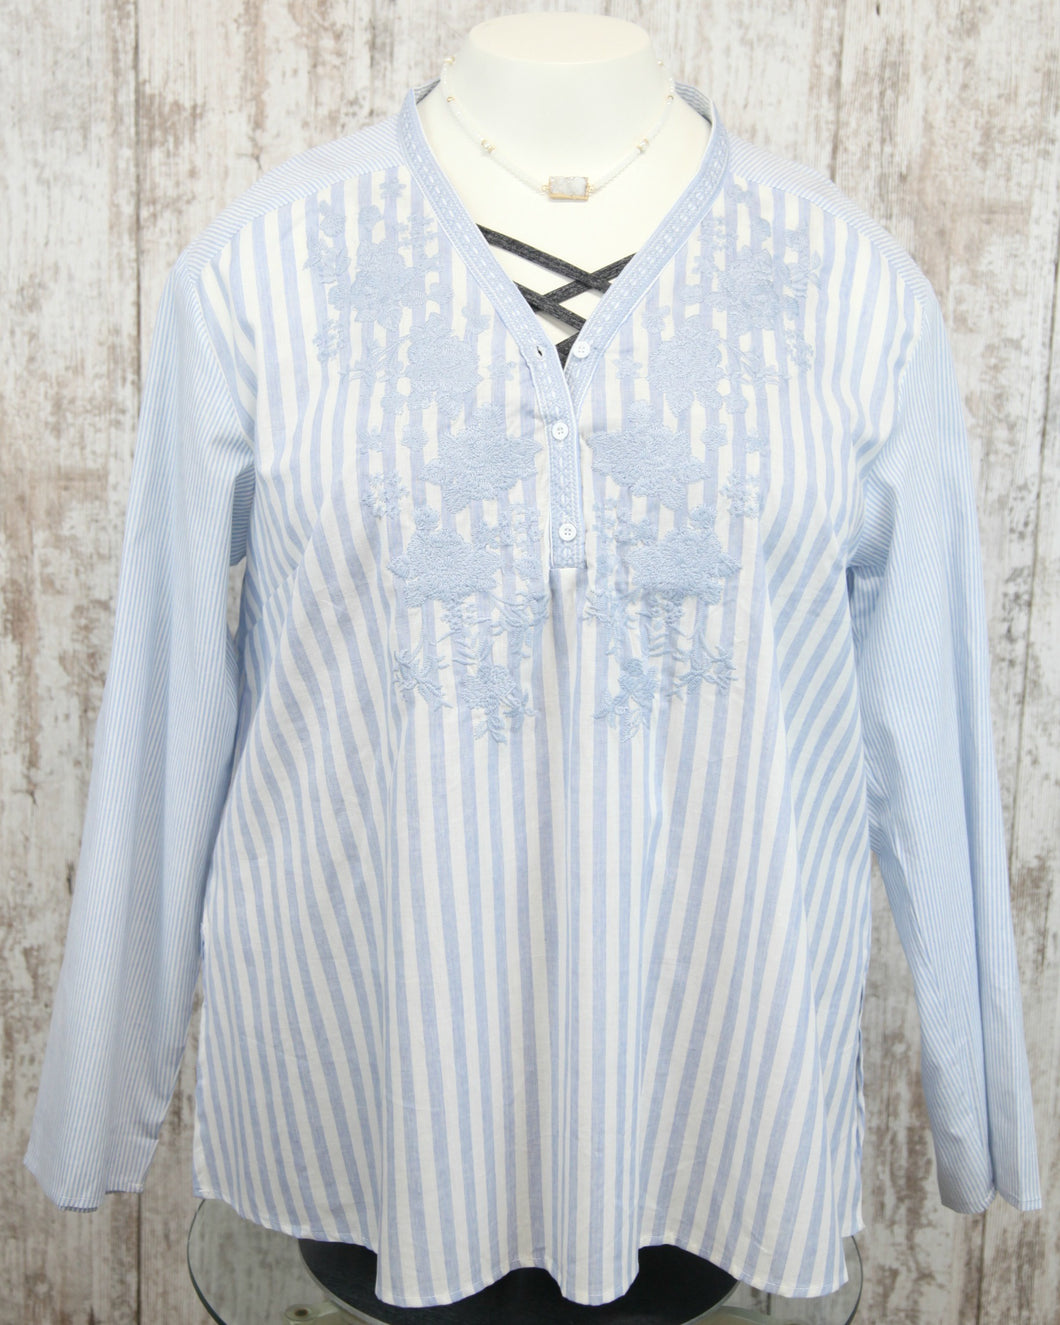 PLUS Roll Up Long Slv Striped Embroidered Top w Vneck w Buttons P14375